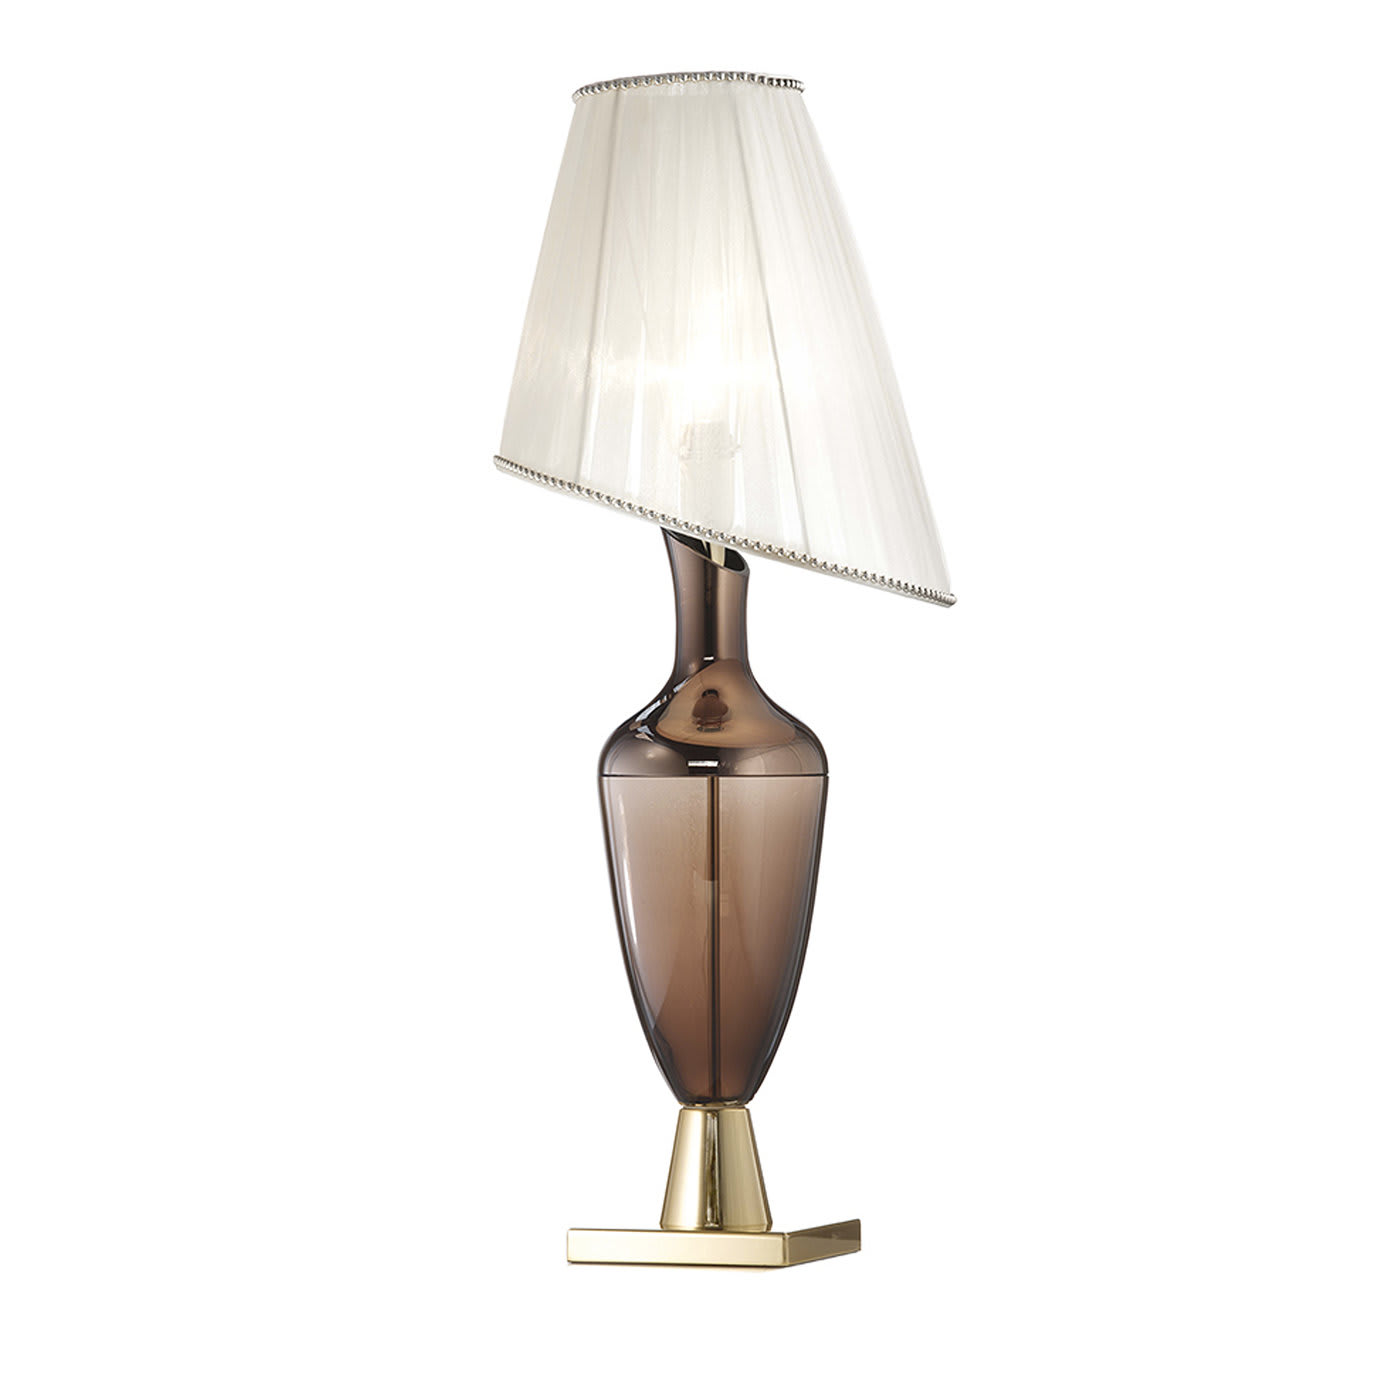 Lady Gold and Coffee Glass Table Lamp - Il Paralume Marina